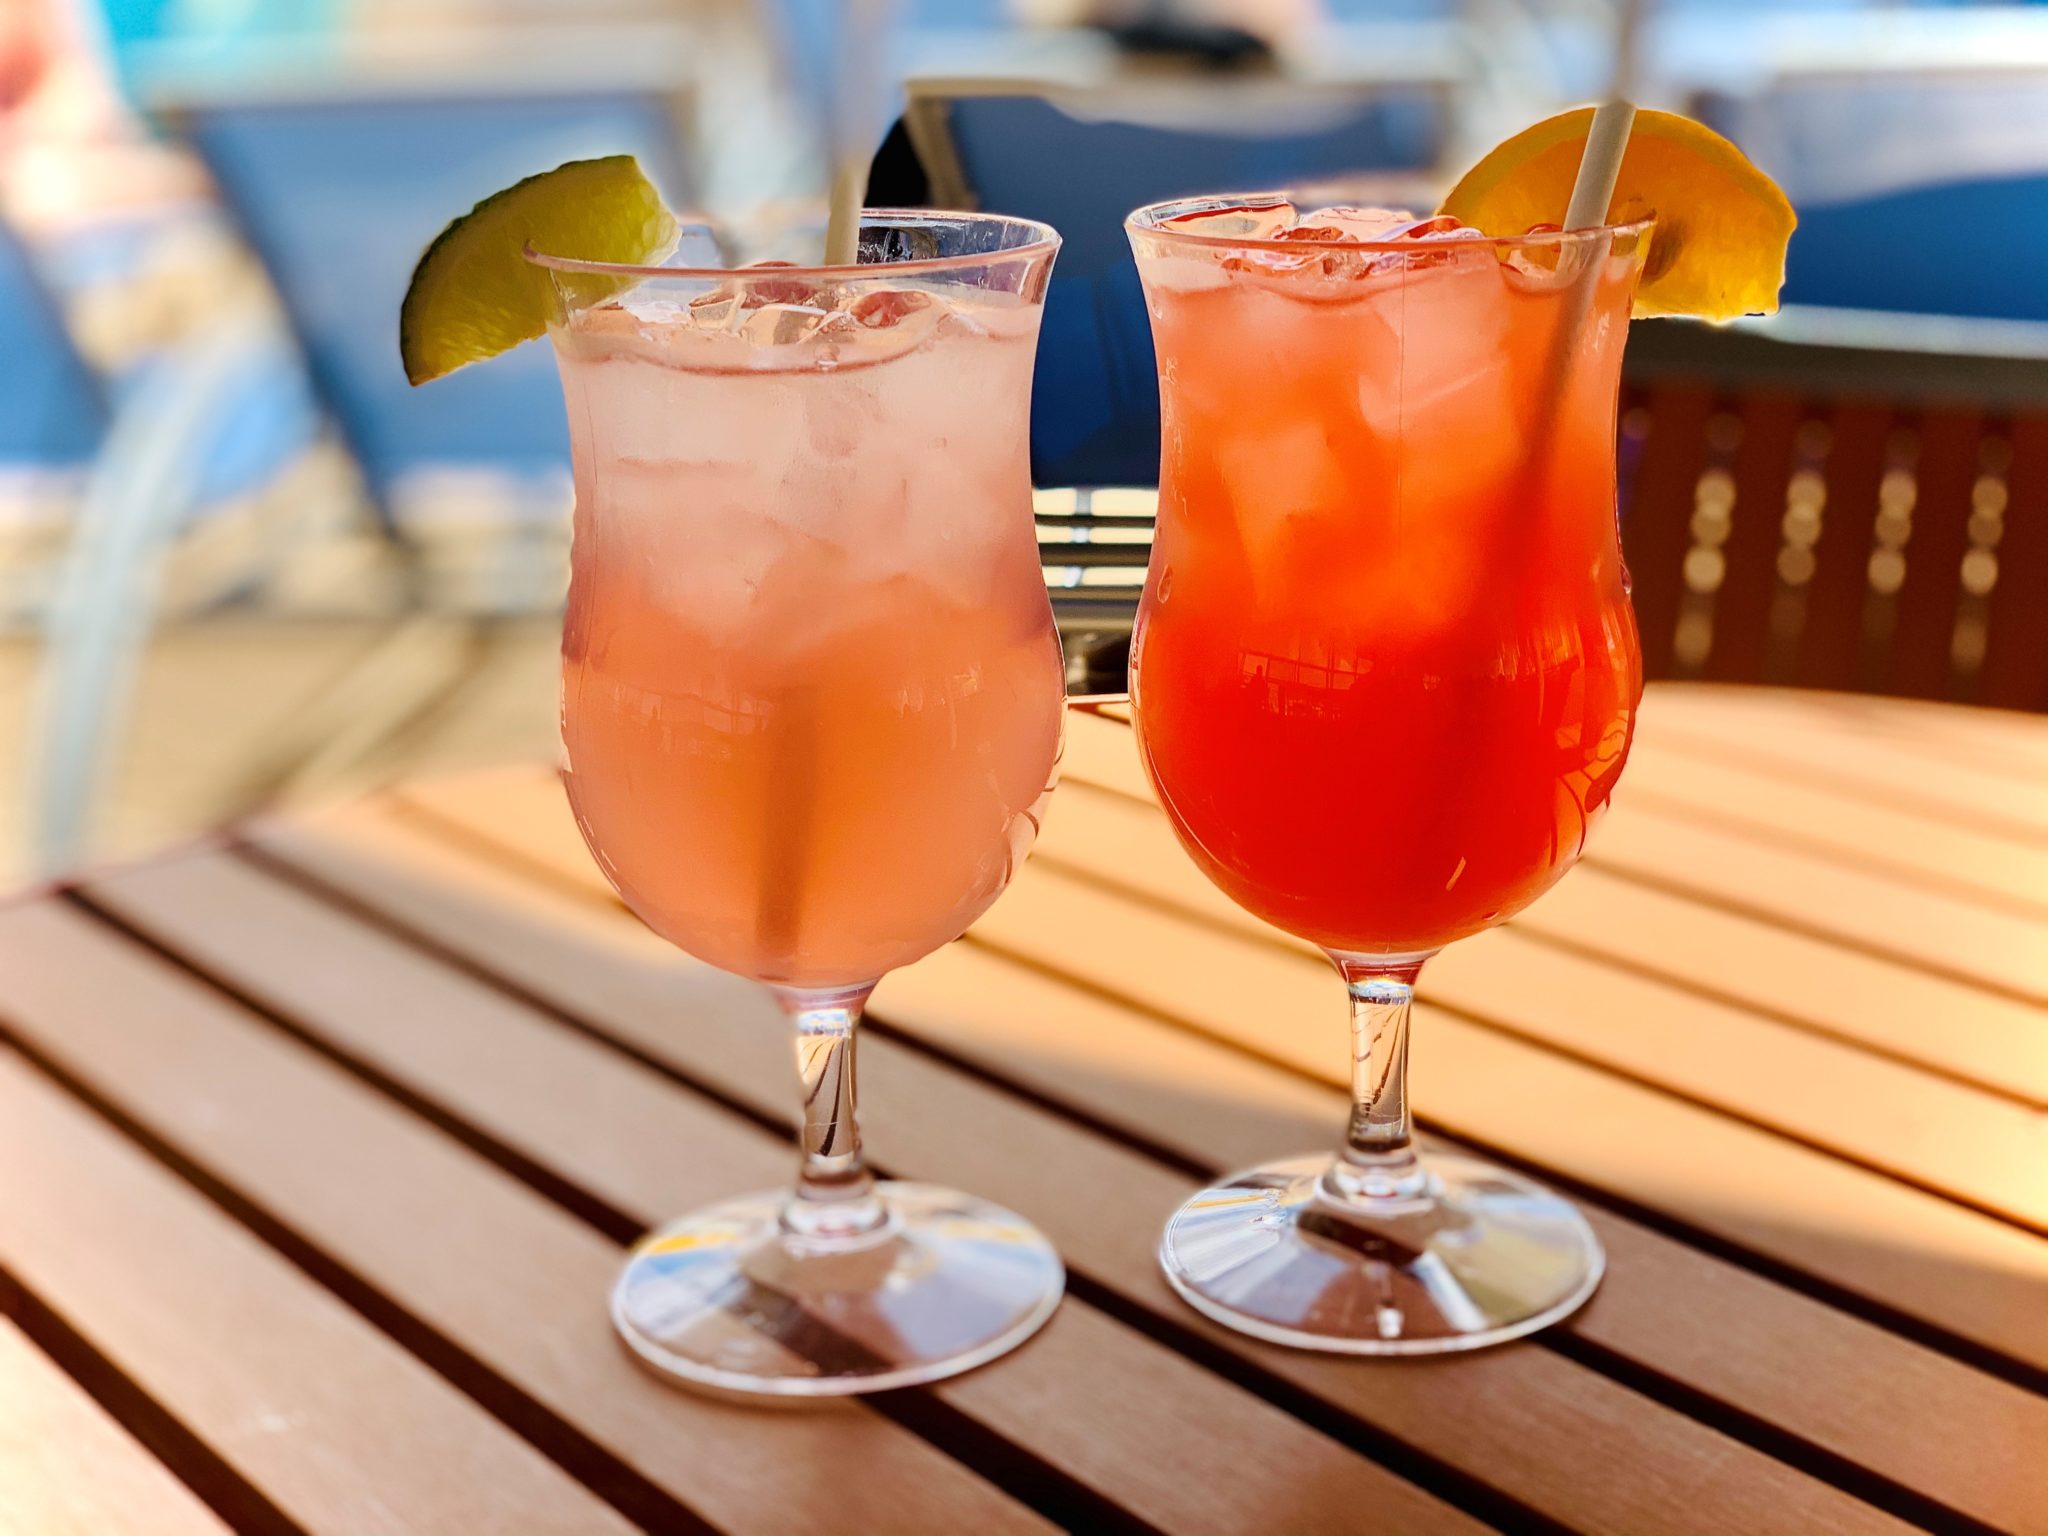 royal caribbean cruise drink package worth it